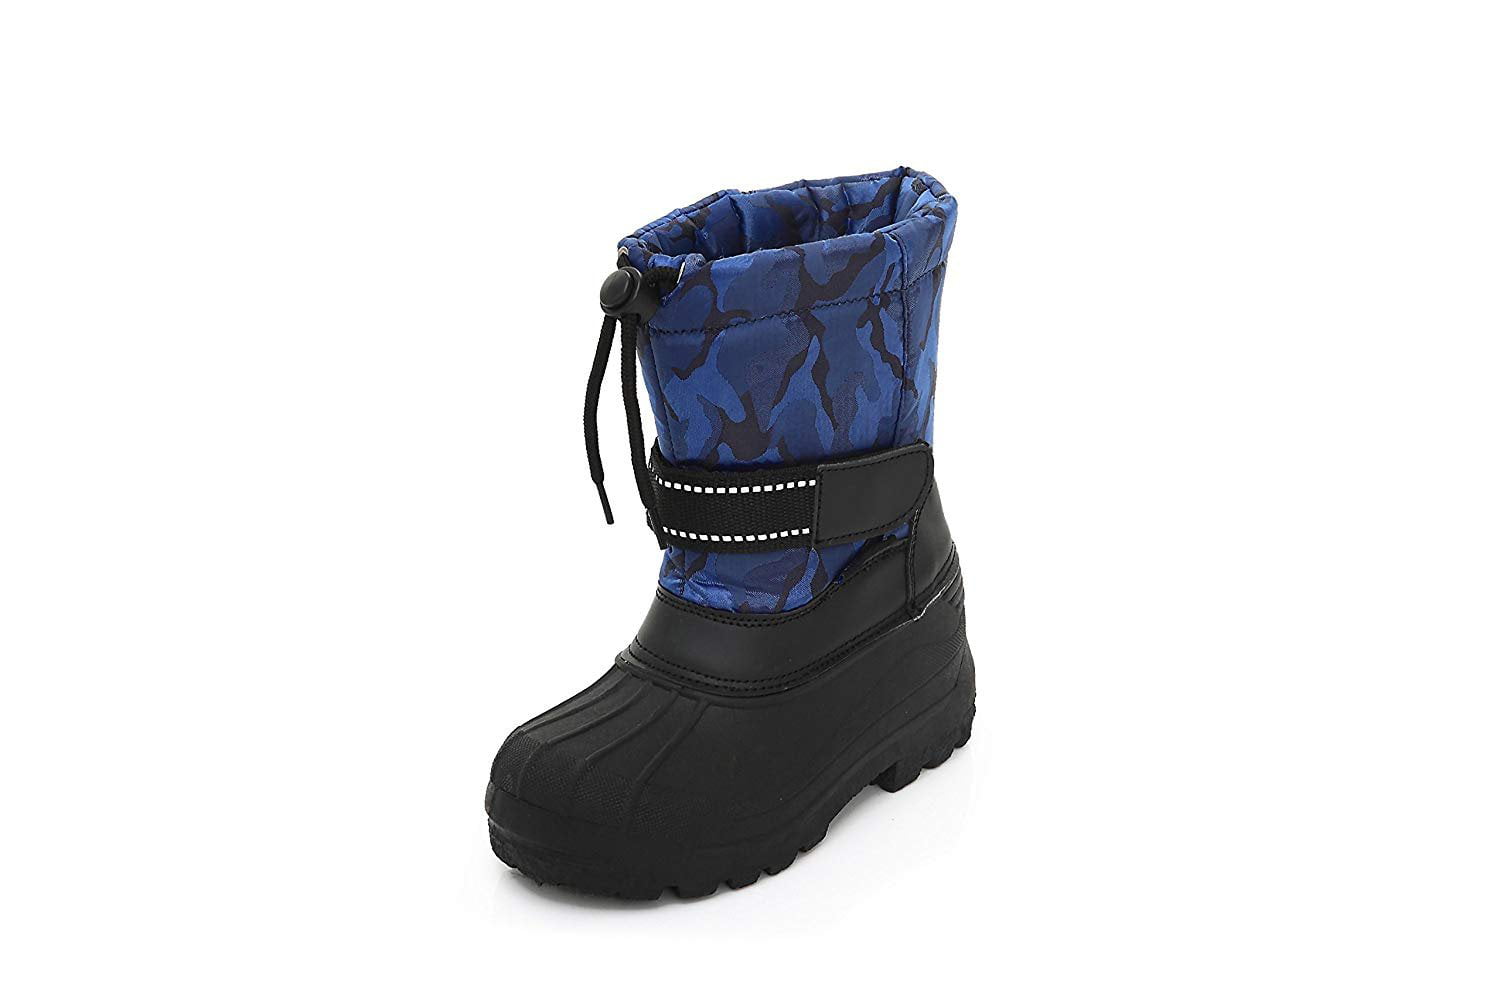 Unisex Waterproof Snow Boots Insulate Boys Girls Many Colors Toddler//Little Kid//Big Kid Cold Weather Snow Boot